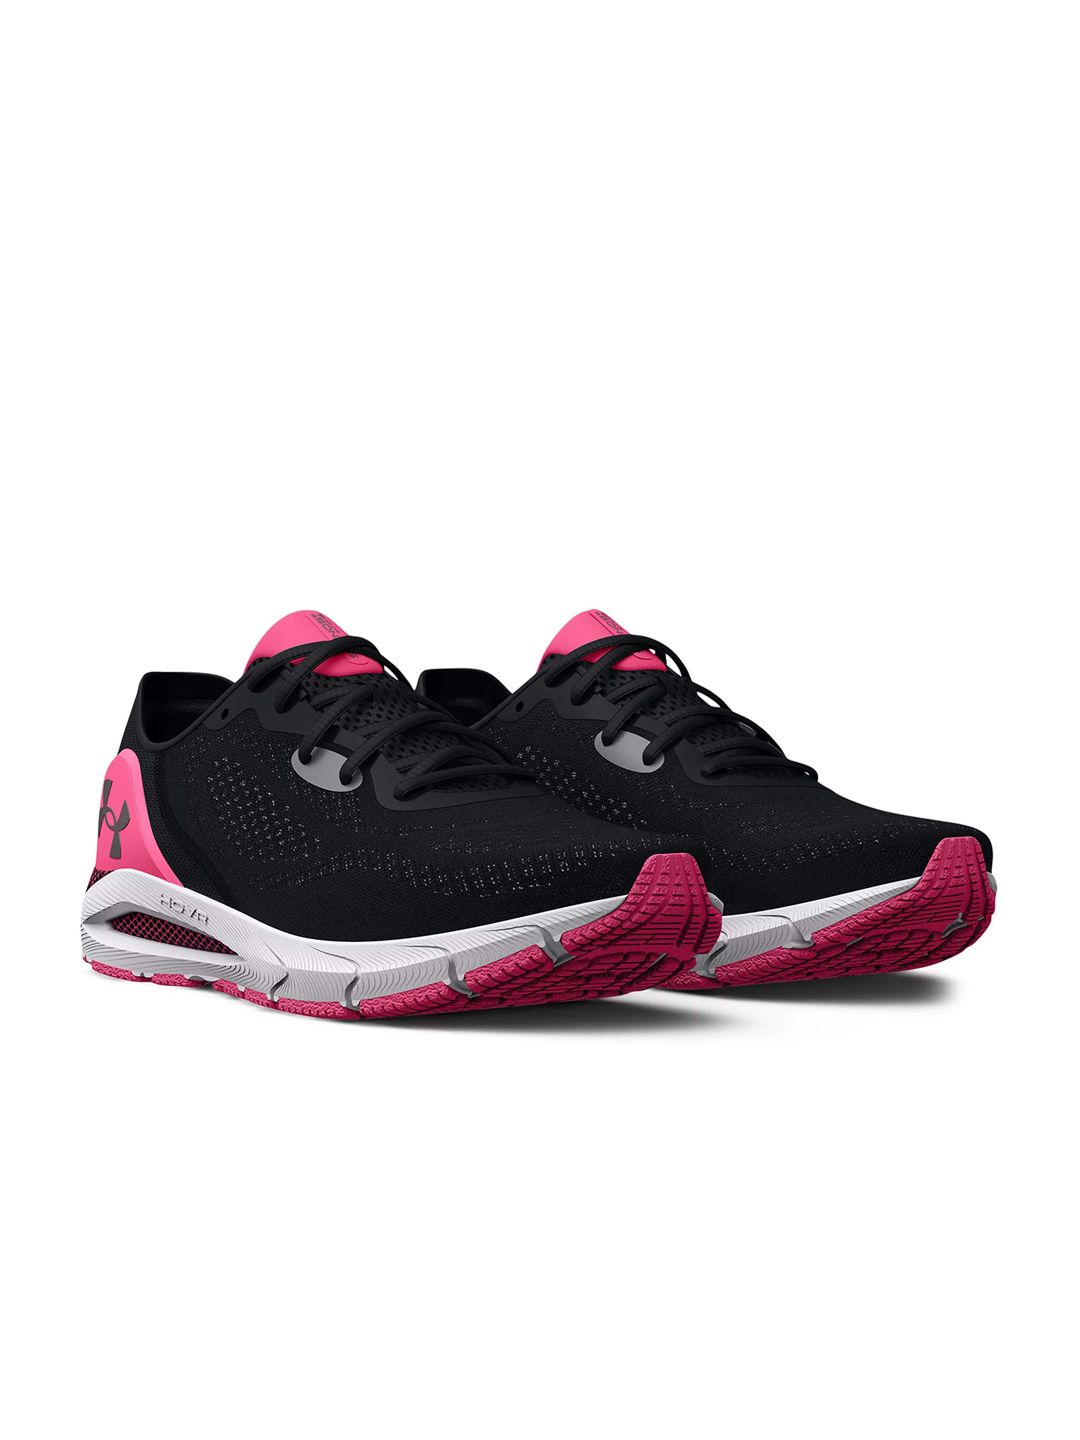 UNDER ARMOUR Women Woven Design HOVR Sonic 5 Running Shoes Price in India